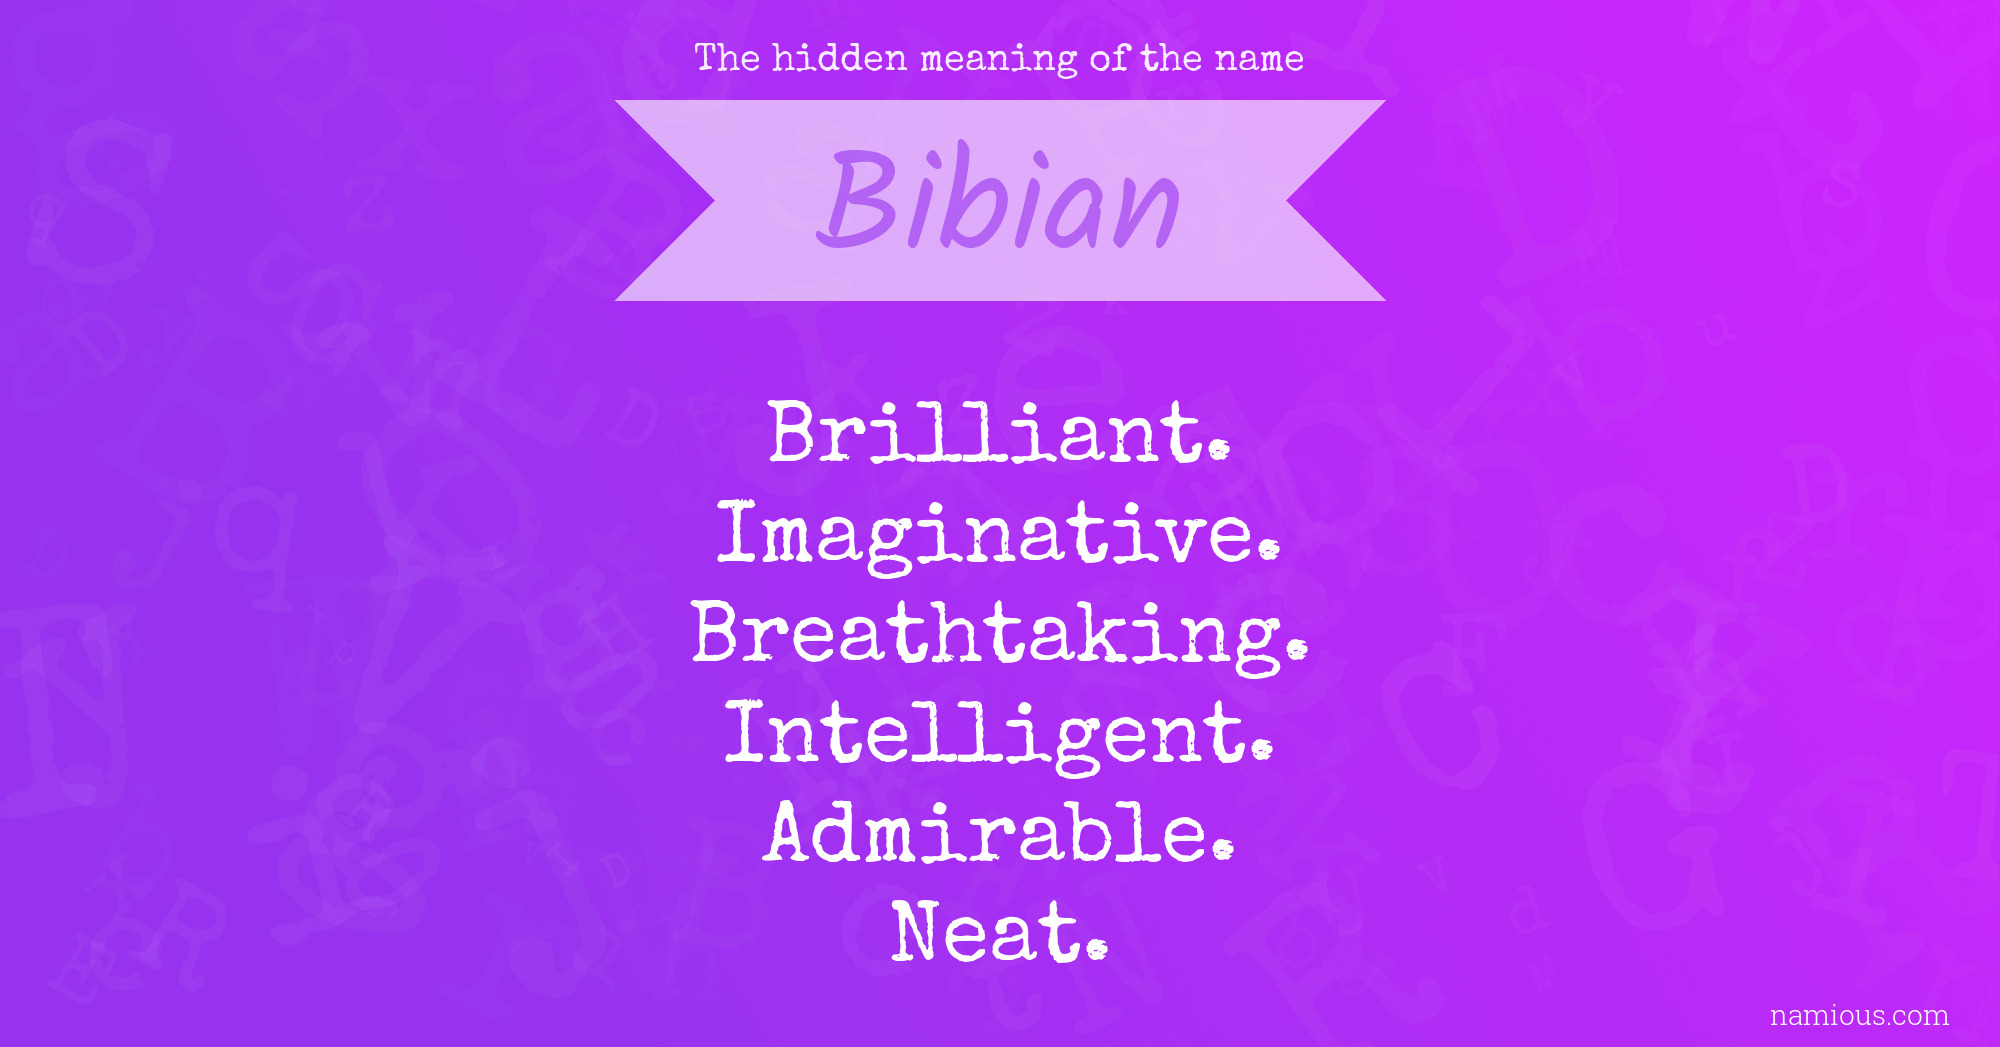 The hidden meaning of the name Bibian